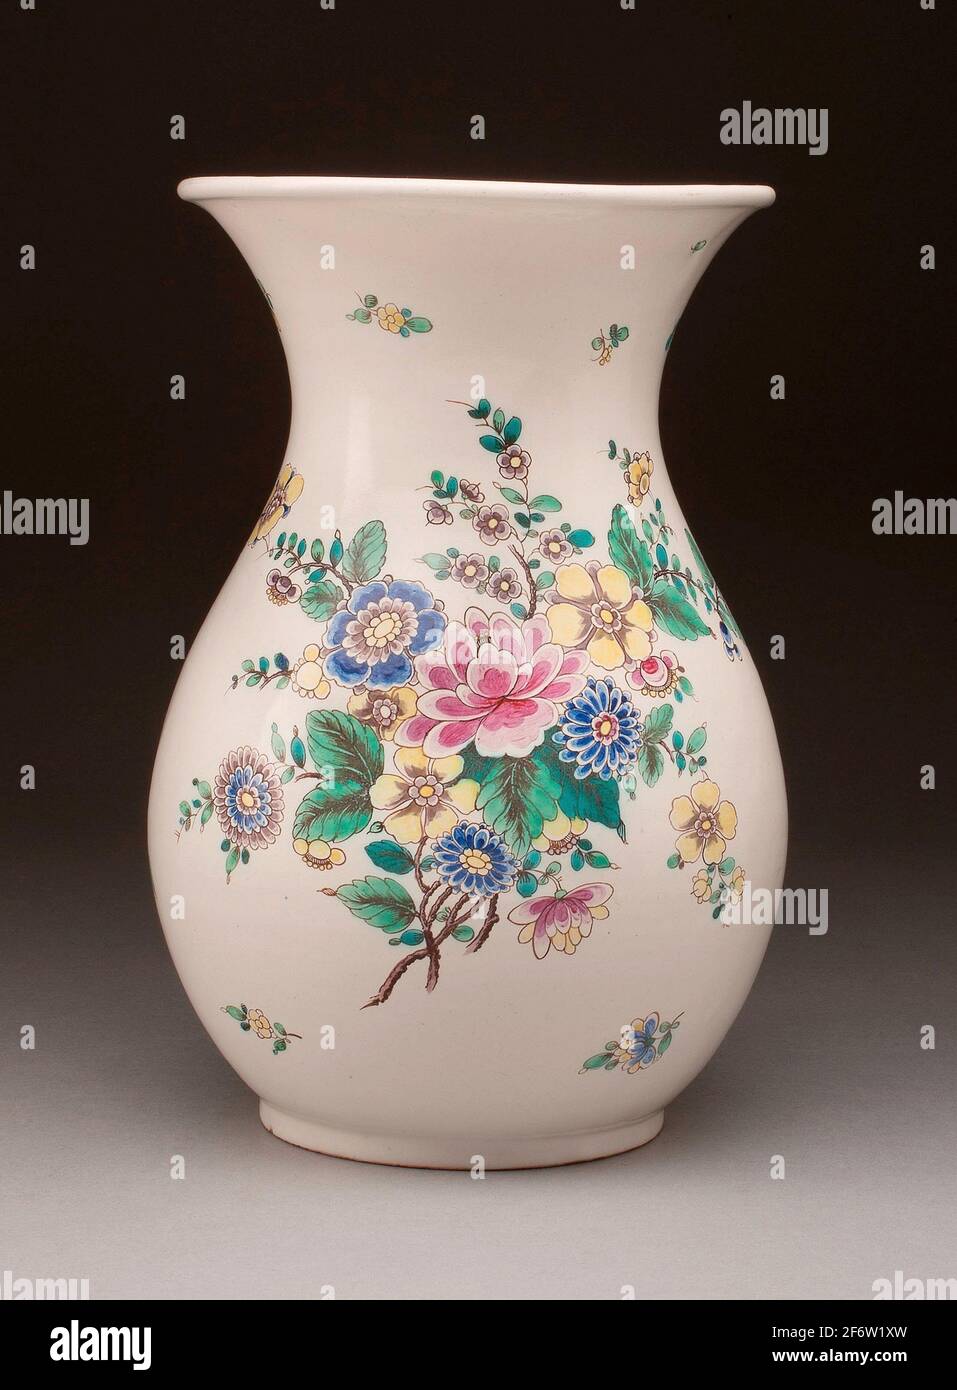 Faience Vase High Resolution Stock Photography and Images - Alamy